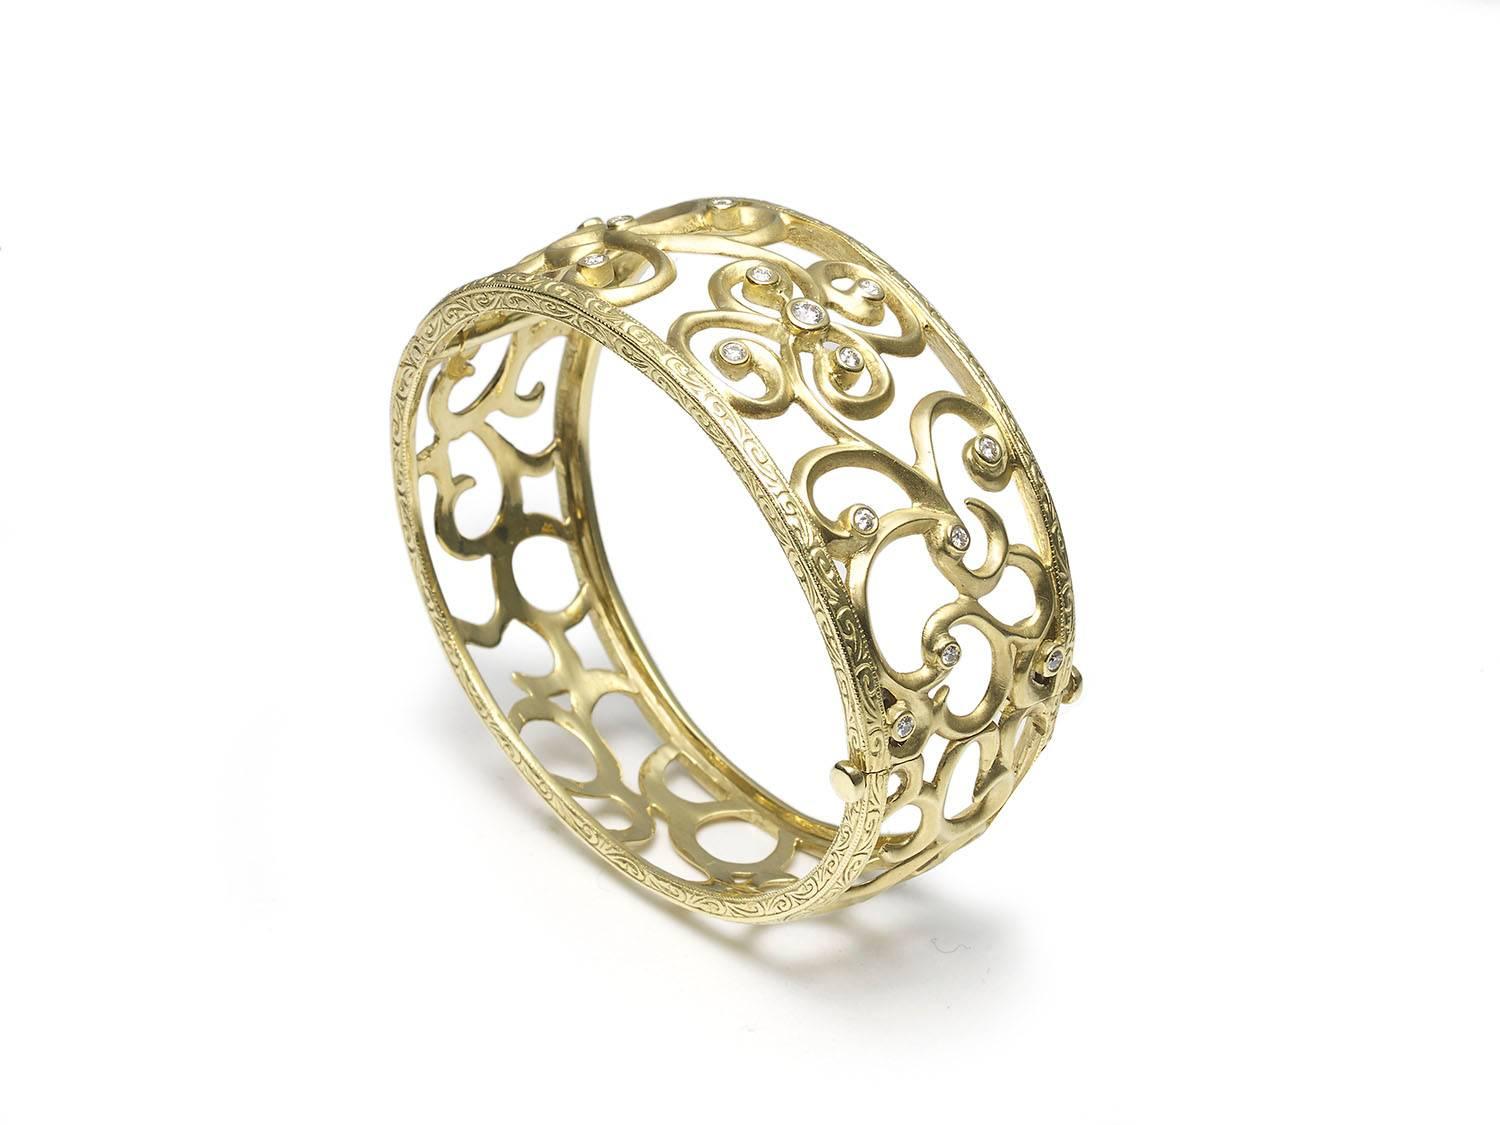 An 18ct gold hinged bangle, wide tapering bangle, with an openwork design set with rub-over set round brilliant cut diamonds weighing an estimated total of 0.40ct, outer edges with engraved detail, inside diameter measures 55 x 47mm